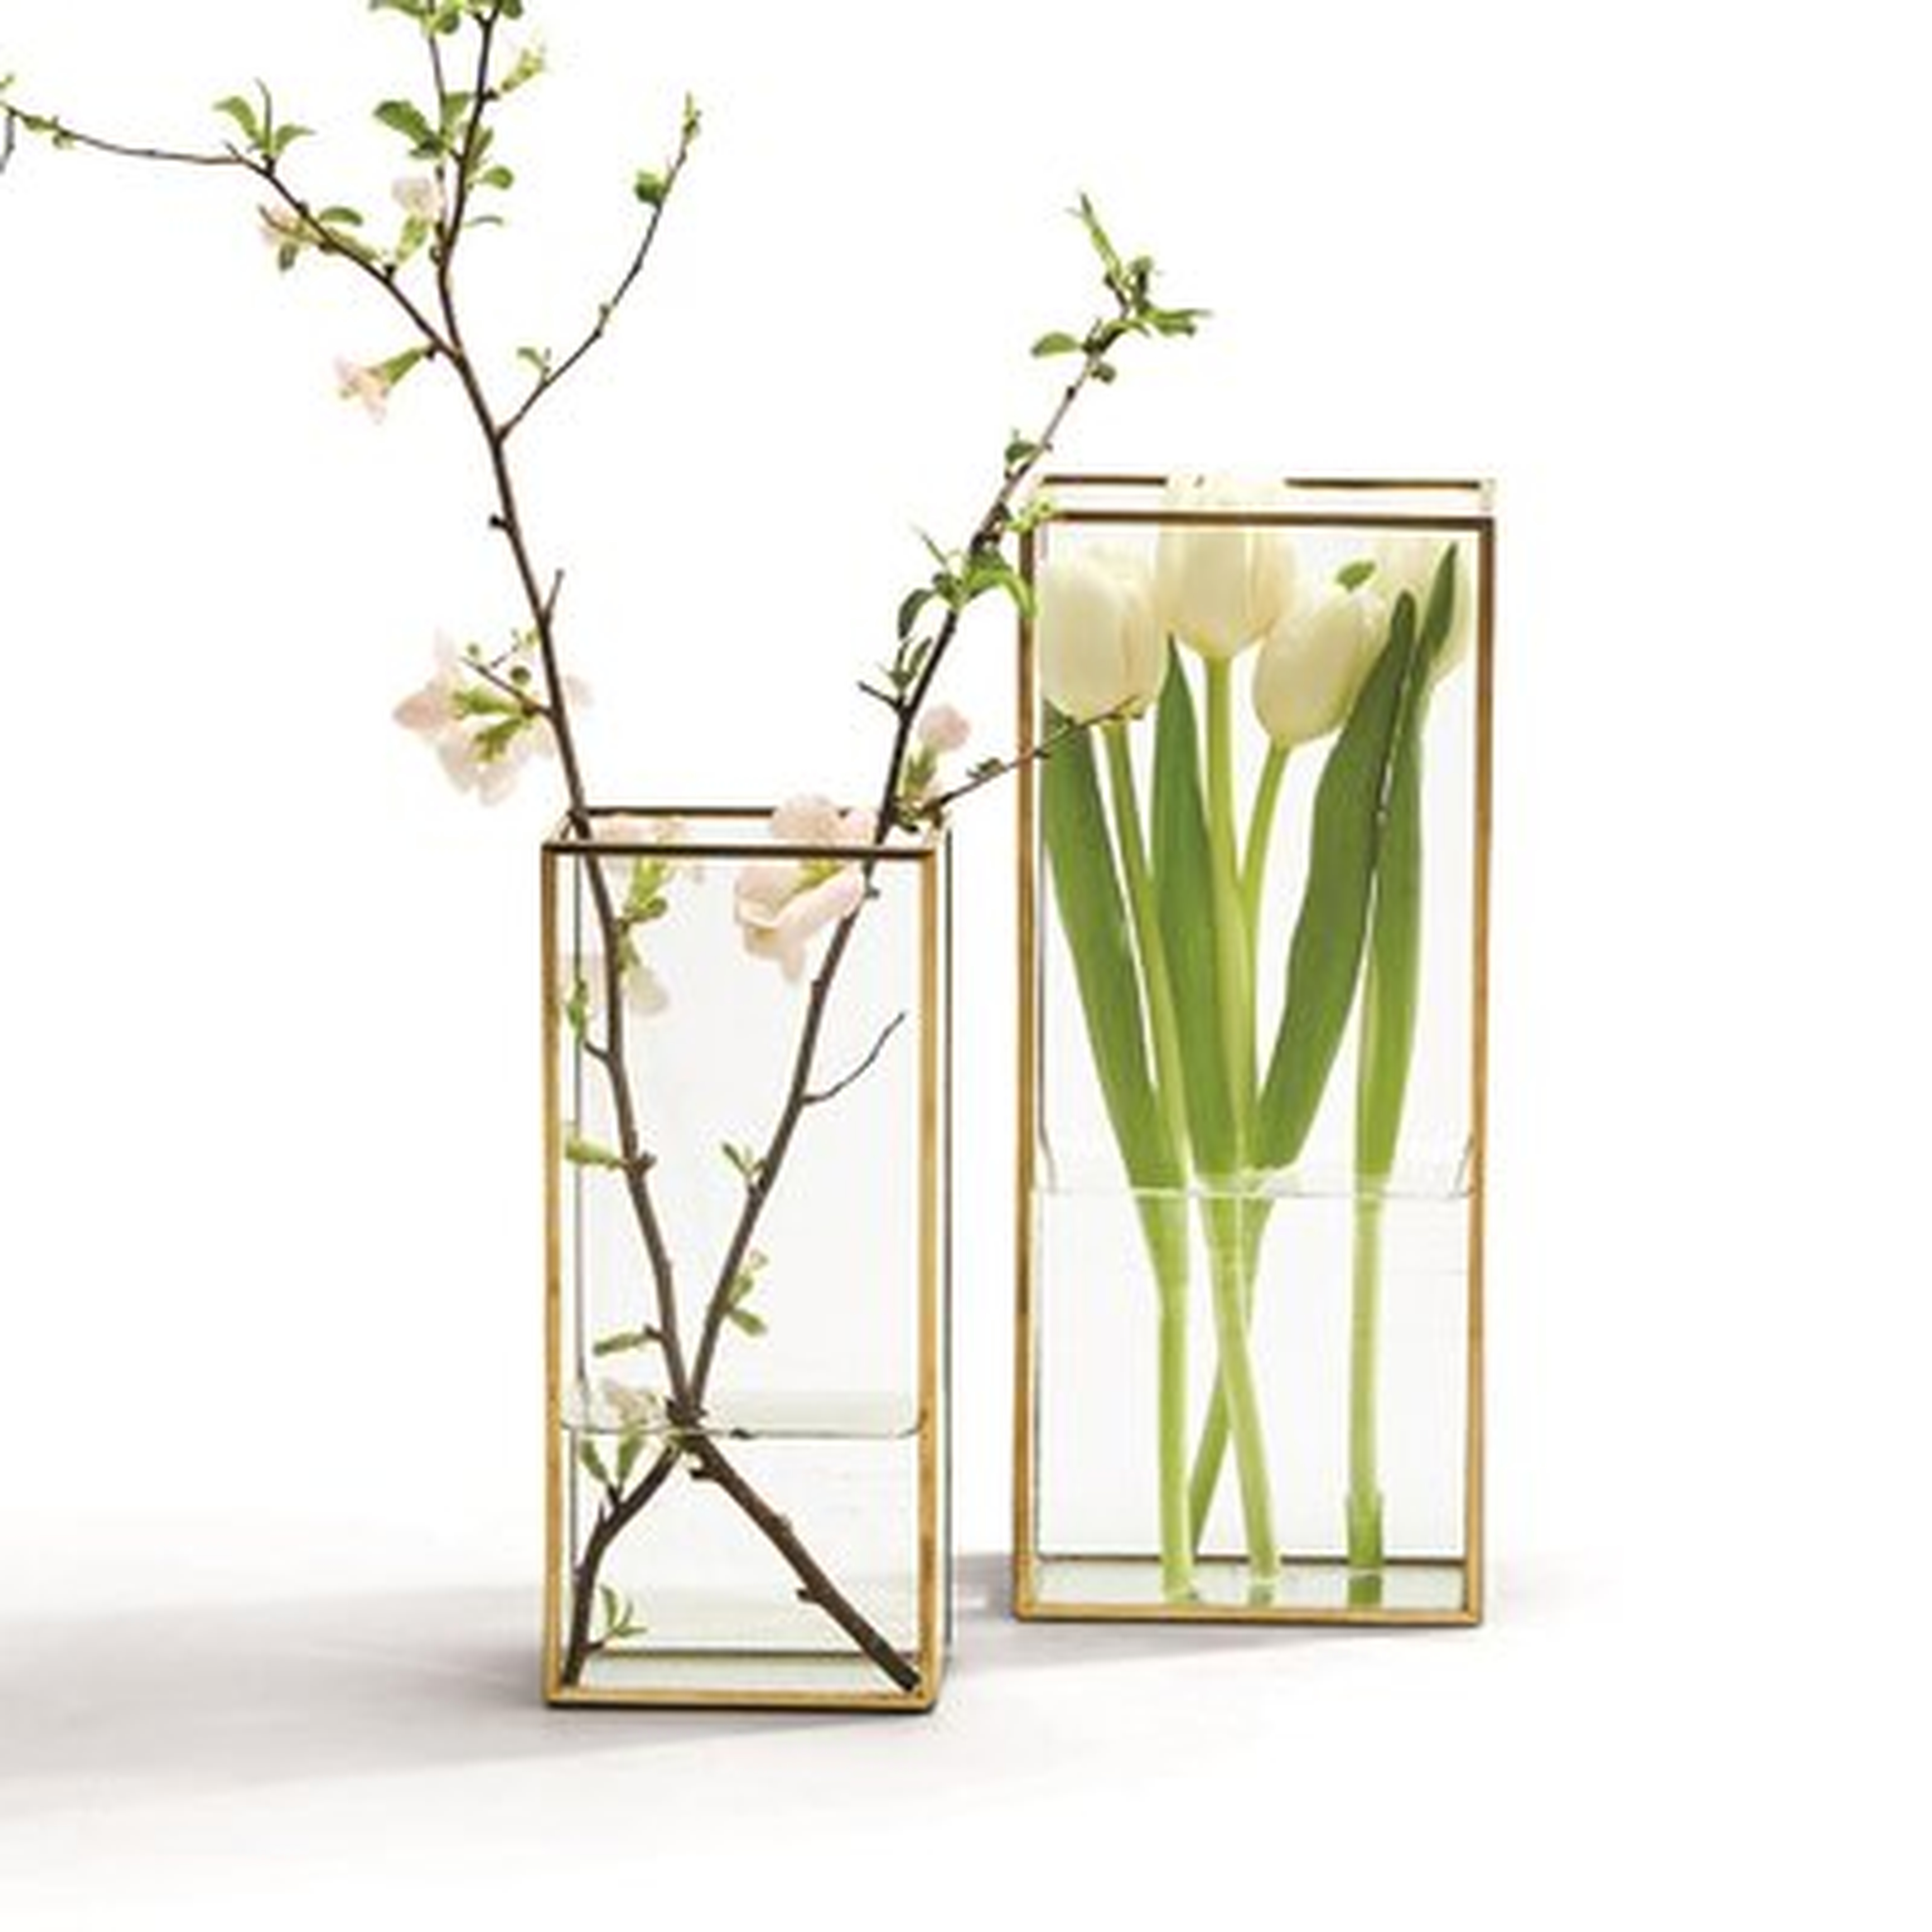 2 Piece Wifrith Clear/Gold Glass Table Vase Set - Wayfair